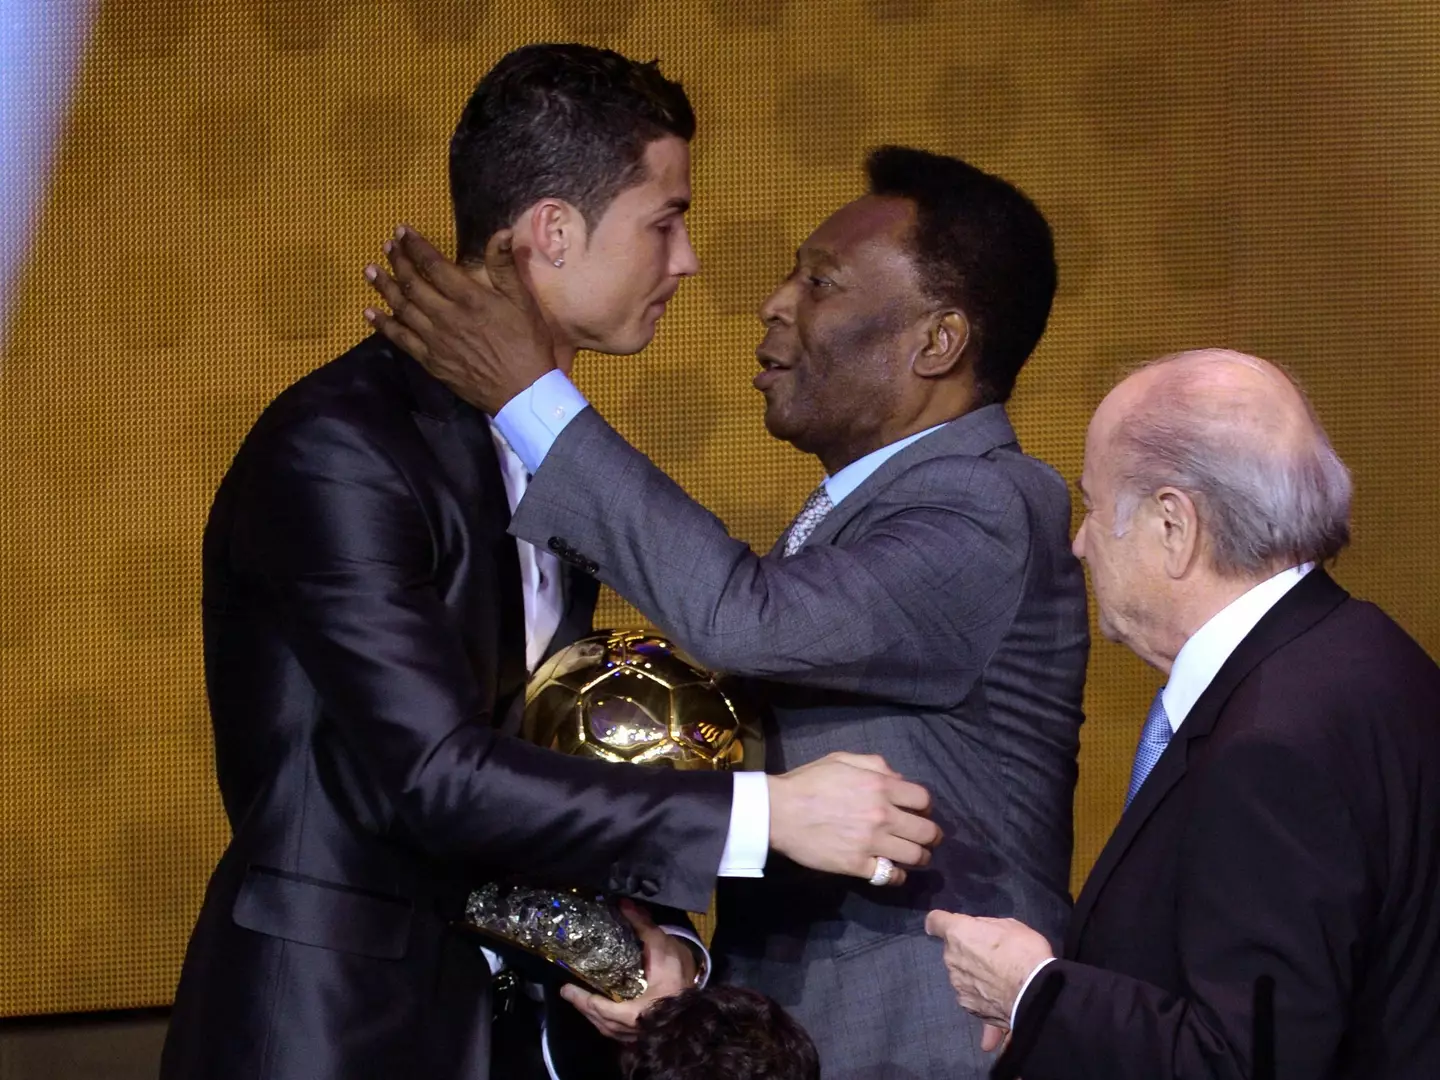 Cristiano Ronaldo and Pele embrace during the Ballon d'Or ceremony in 2014. Image: Alamy 